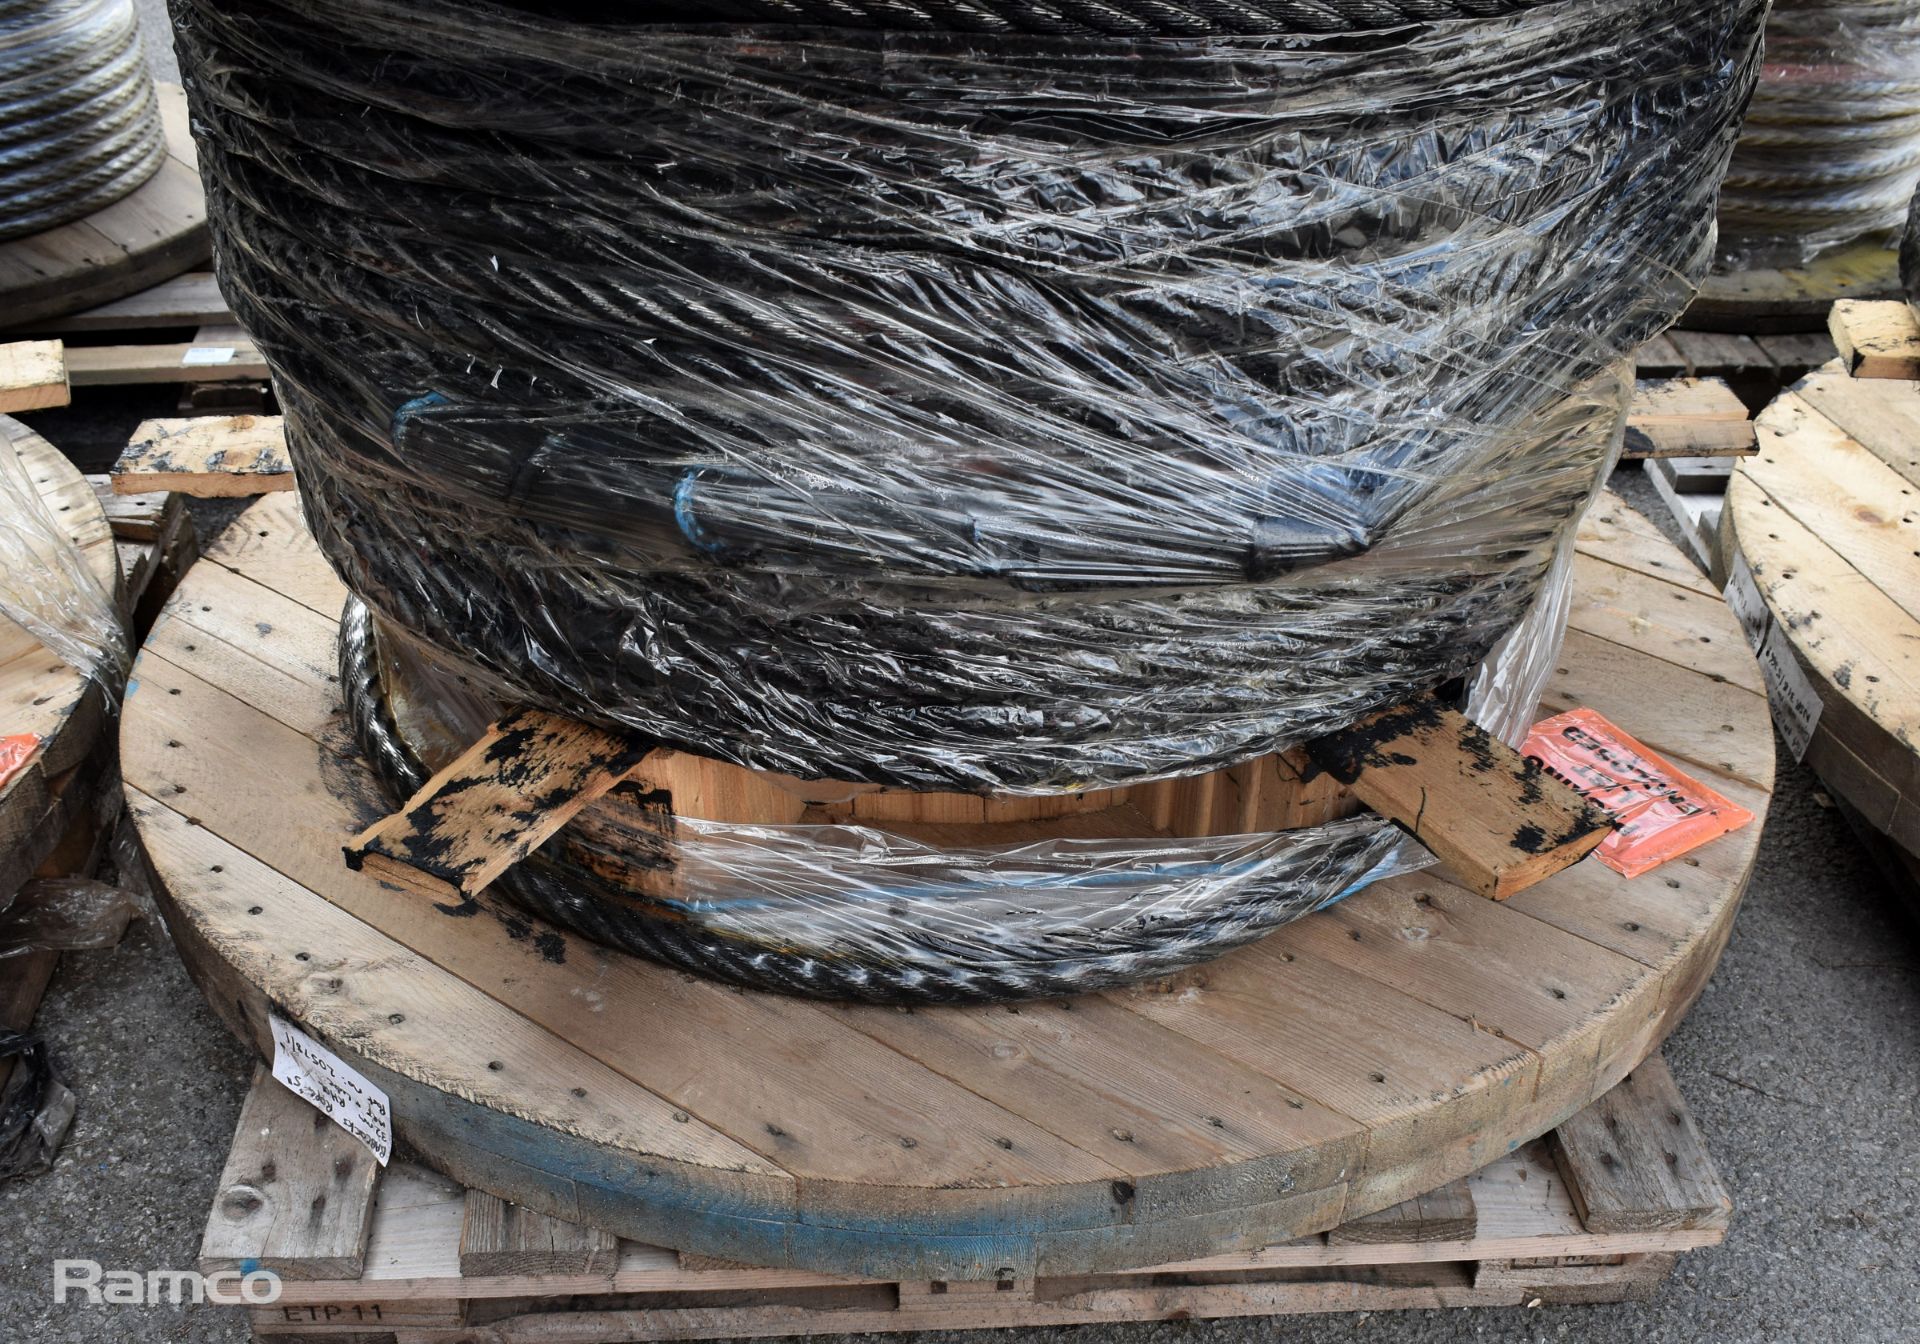 32mm 6x36 galvanised steel wire rope reel - approx weight: 1400kg - Image 3 of 4